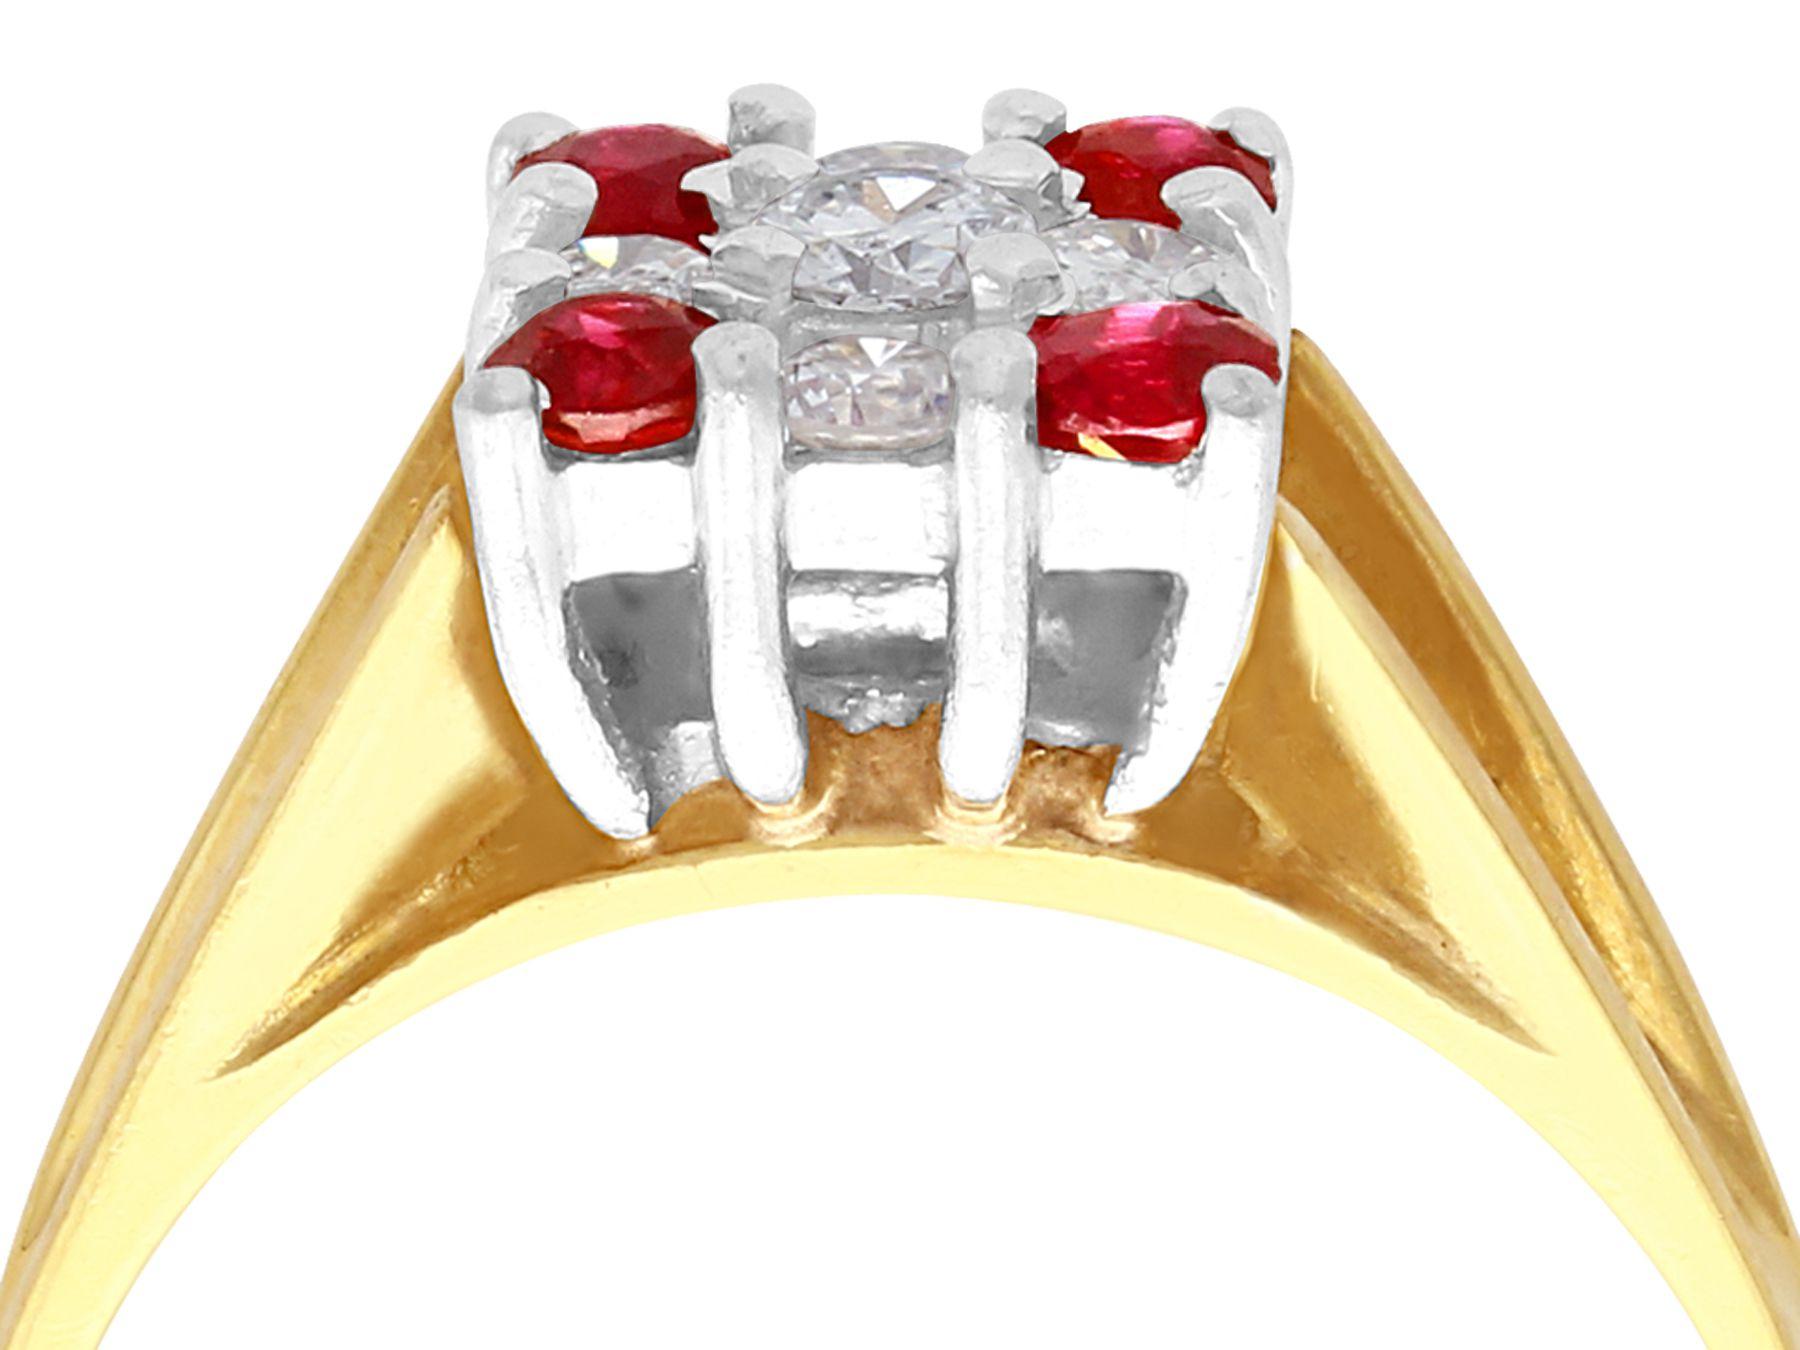 A fine 0.24 carat natural ruby and 0.25 carat diamond, 18 karat yellow gold, 18 karat white gold set dress ring; part of our contemporary jewelry and estate jewelry collections.

This contemporary ruby and diamond ring has been crafted in 18k yellow